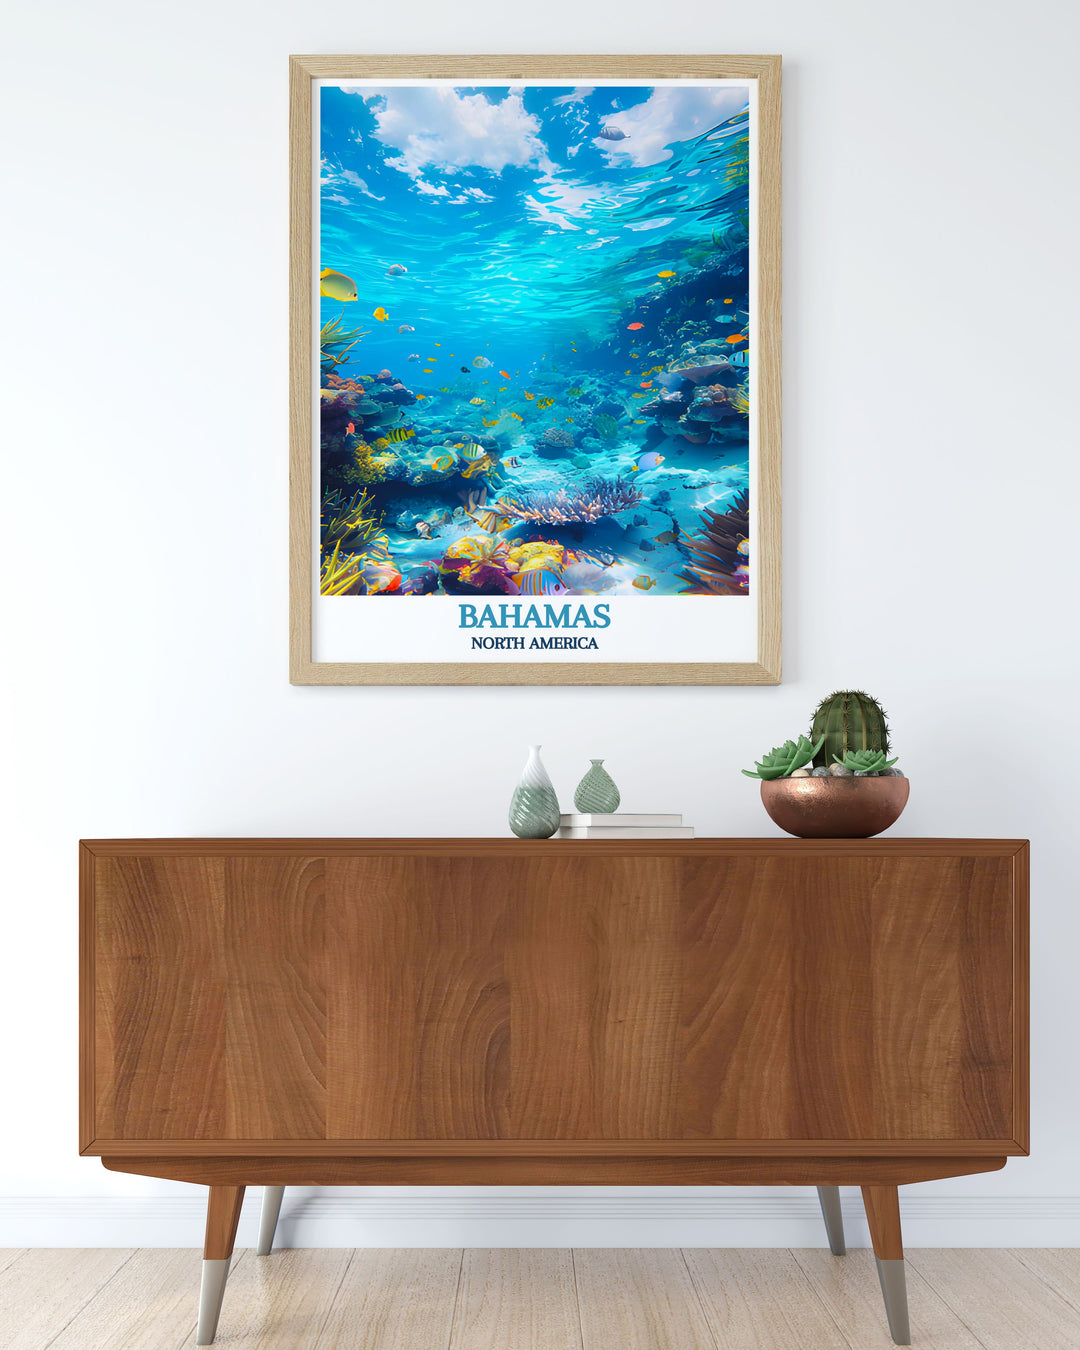 Bahama wall art that brings the lush, tropical vibe of the Caribbean islands into your living space, with vivid colors and breathtaking scenery.